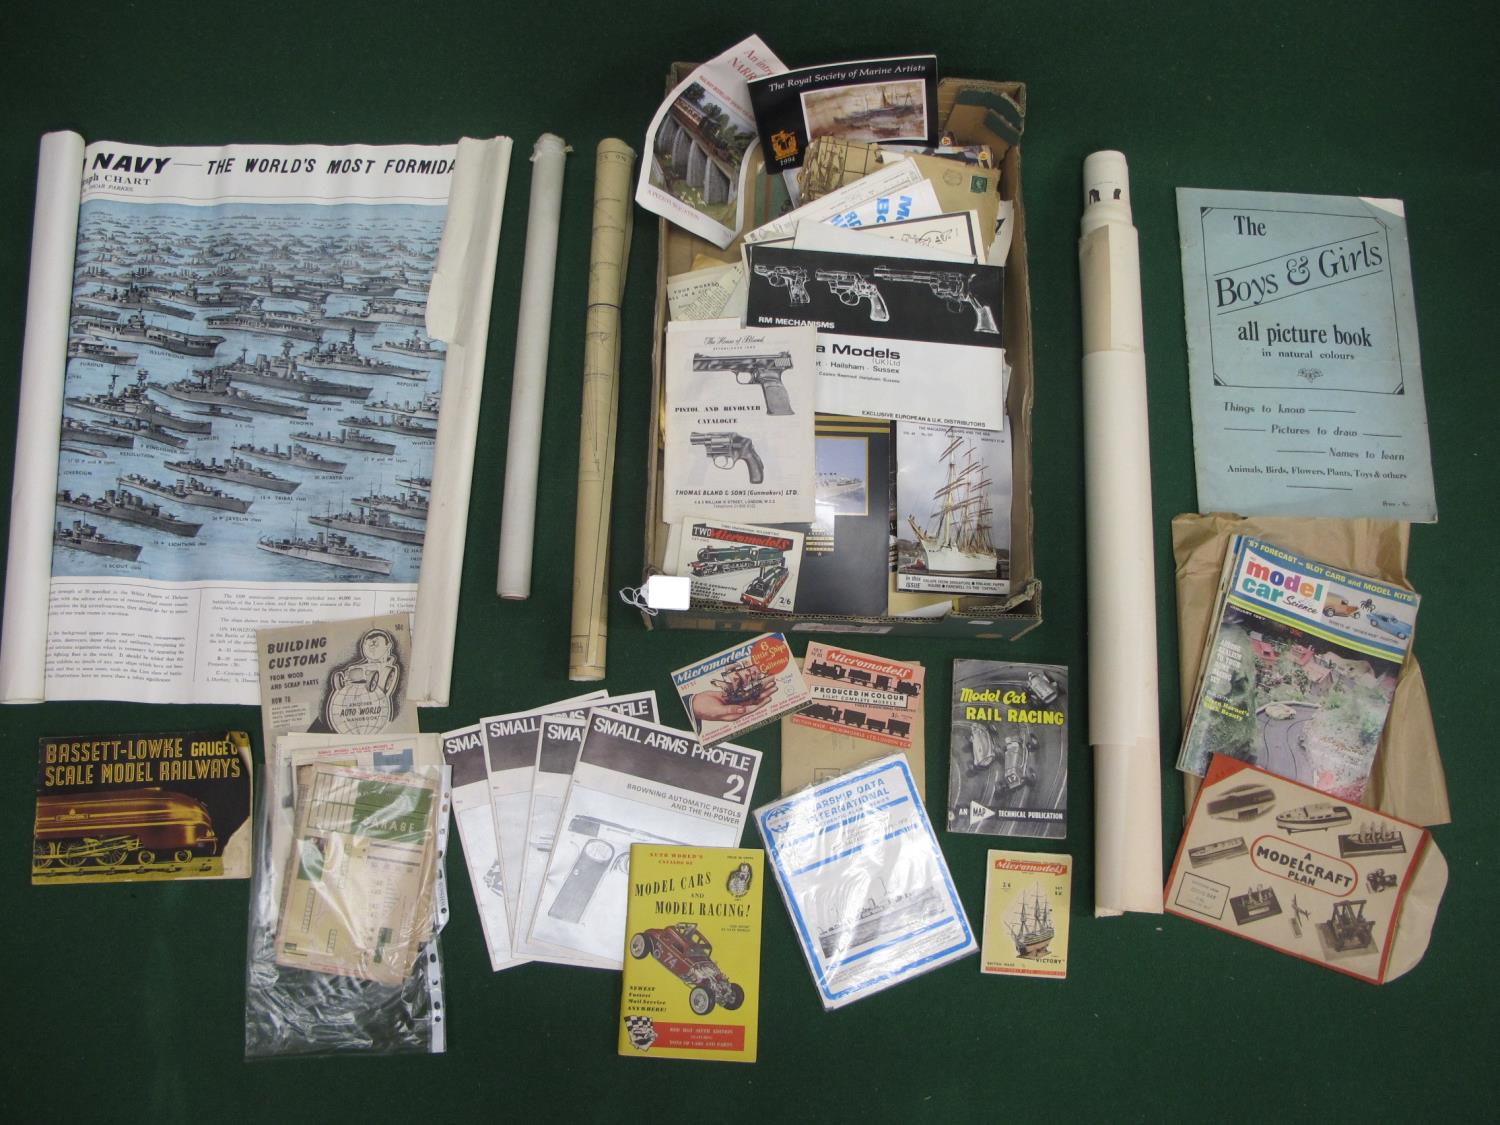 Large box full of model and model railway ephemera, leaflets, booklets and catalogues from the